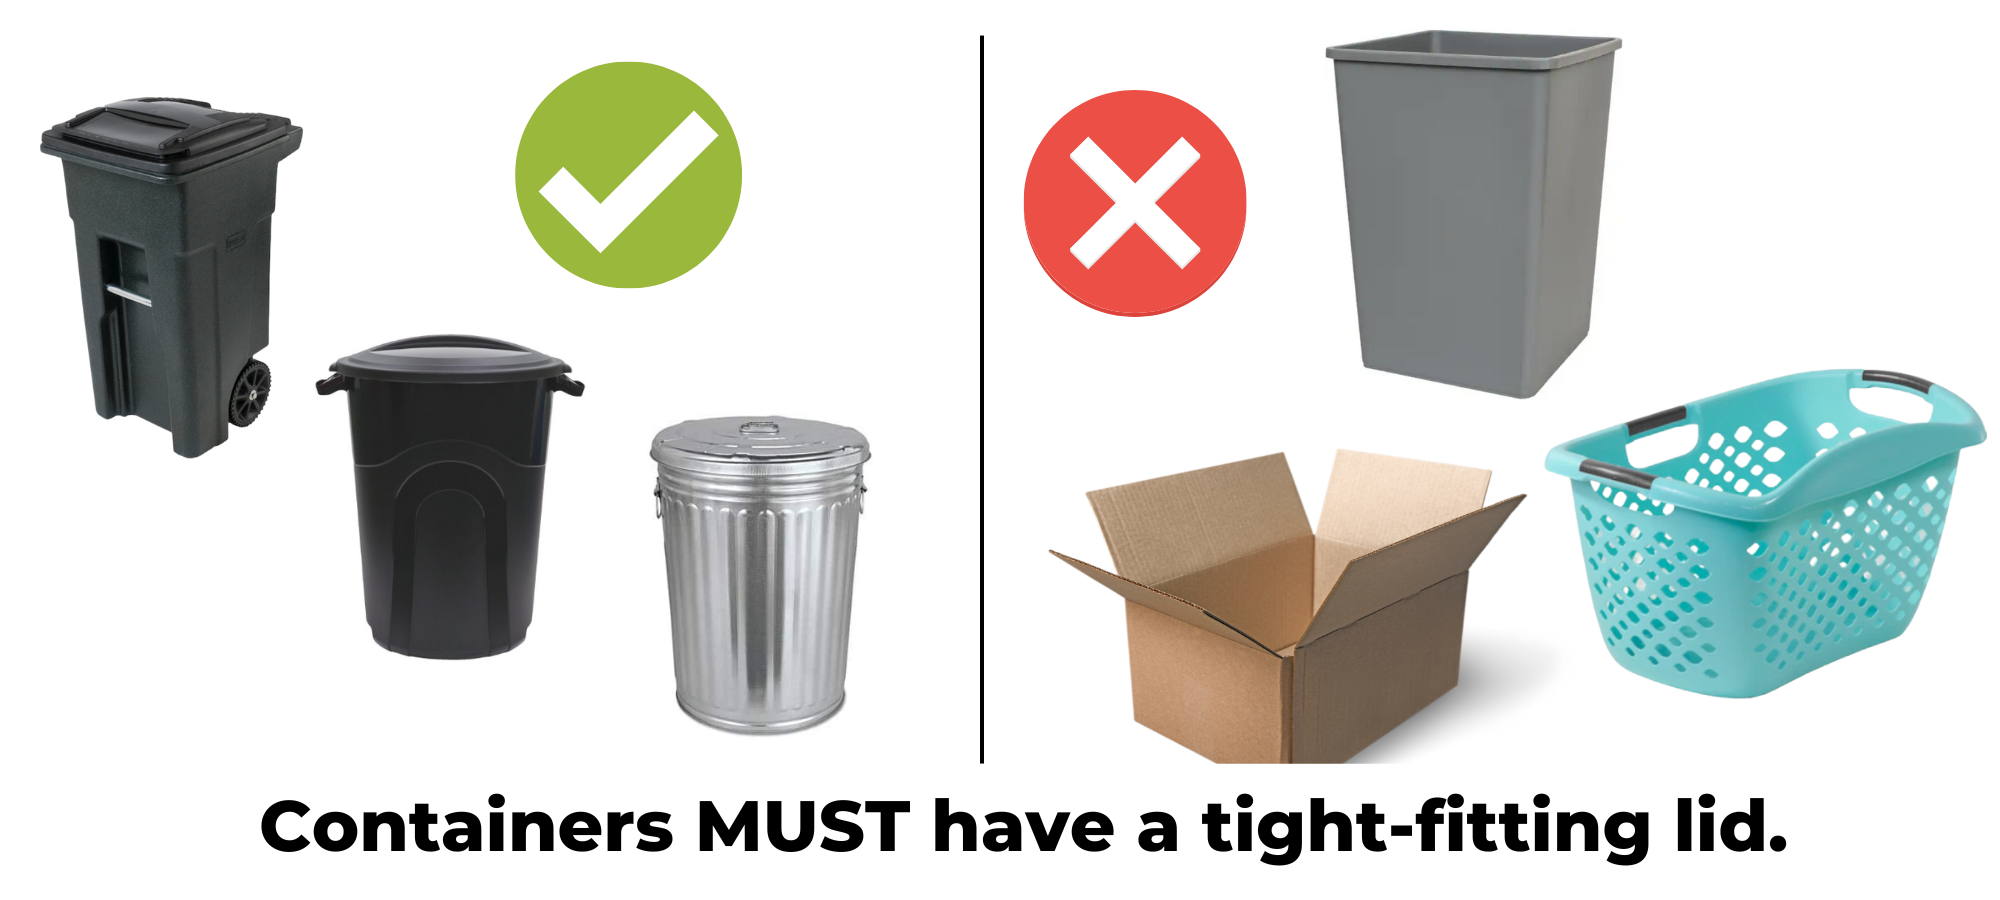 examples of trash containers